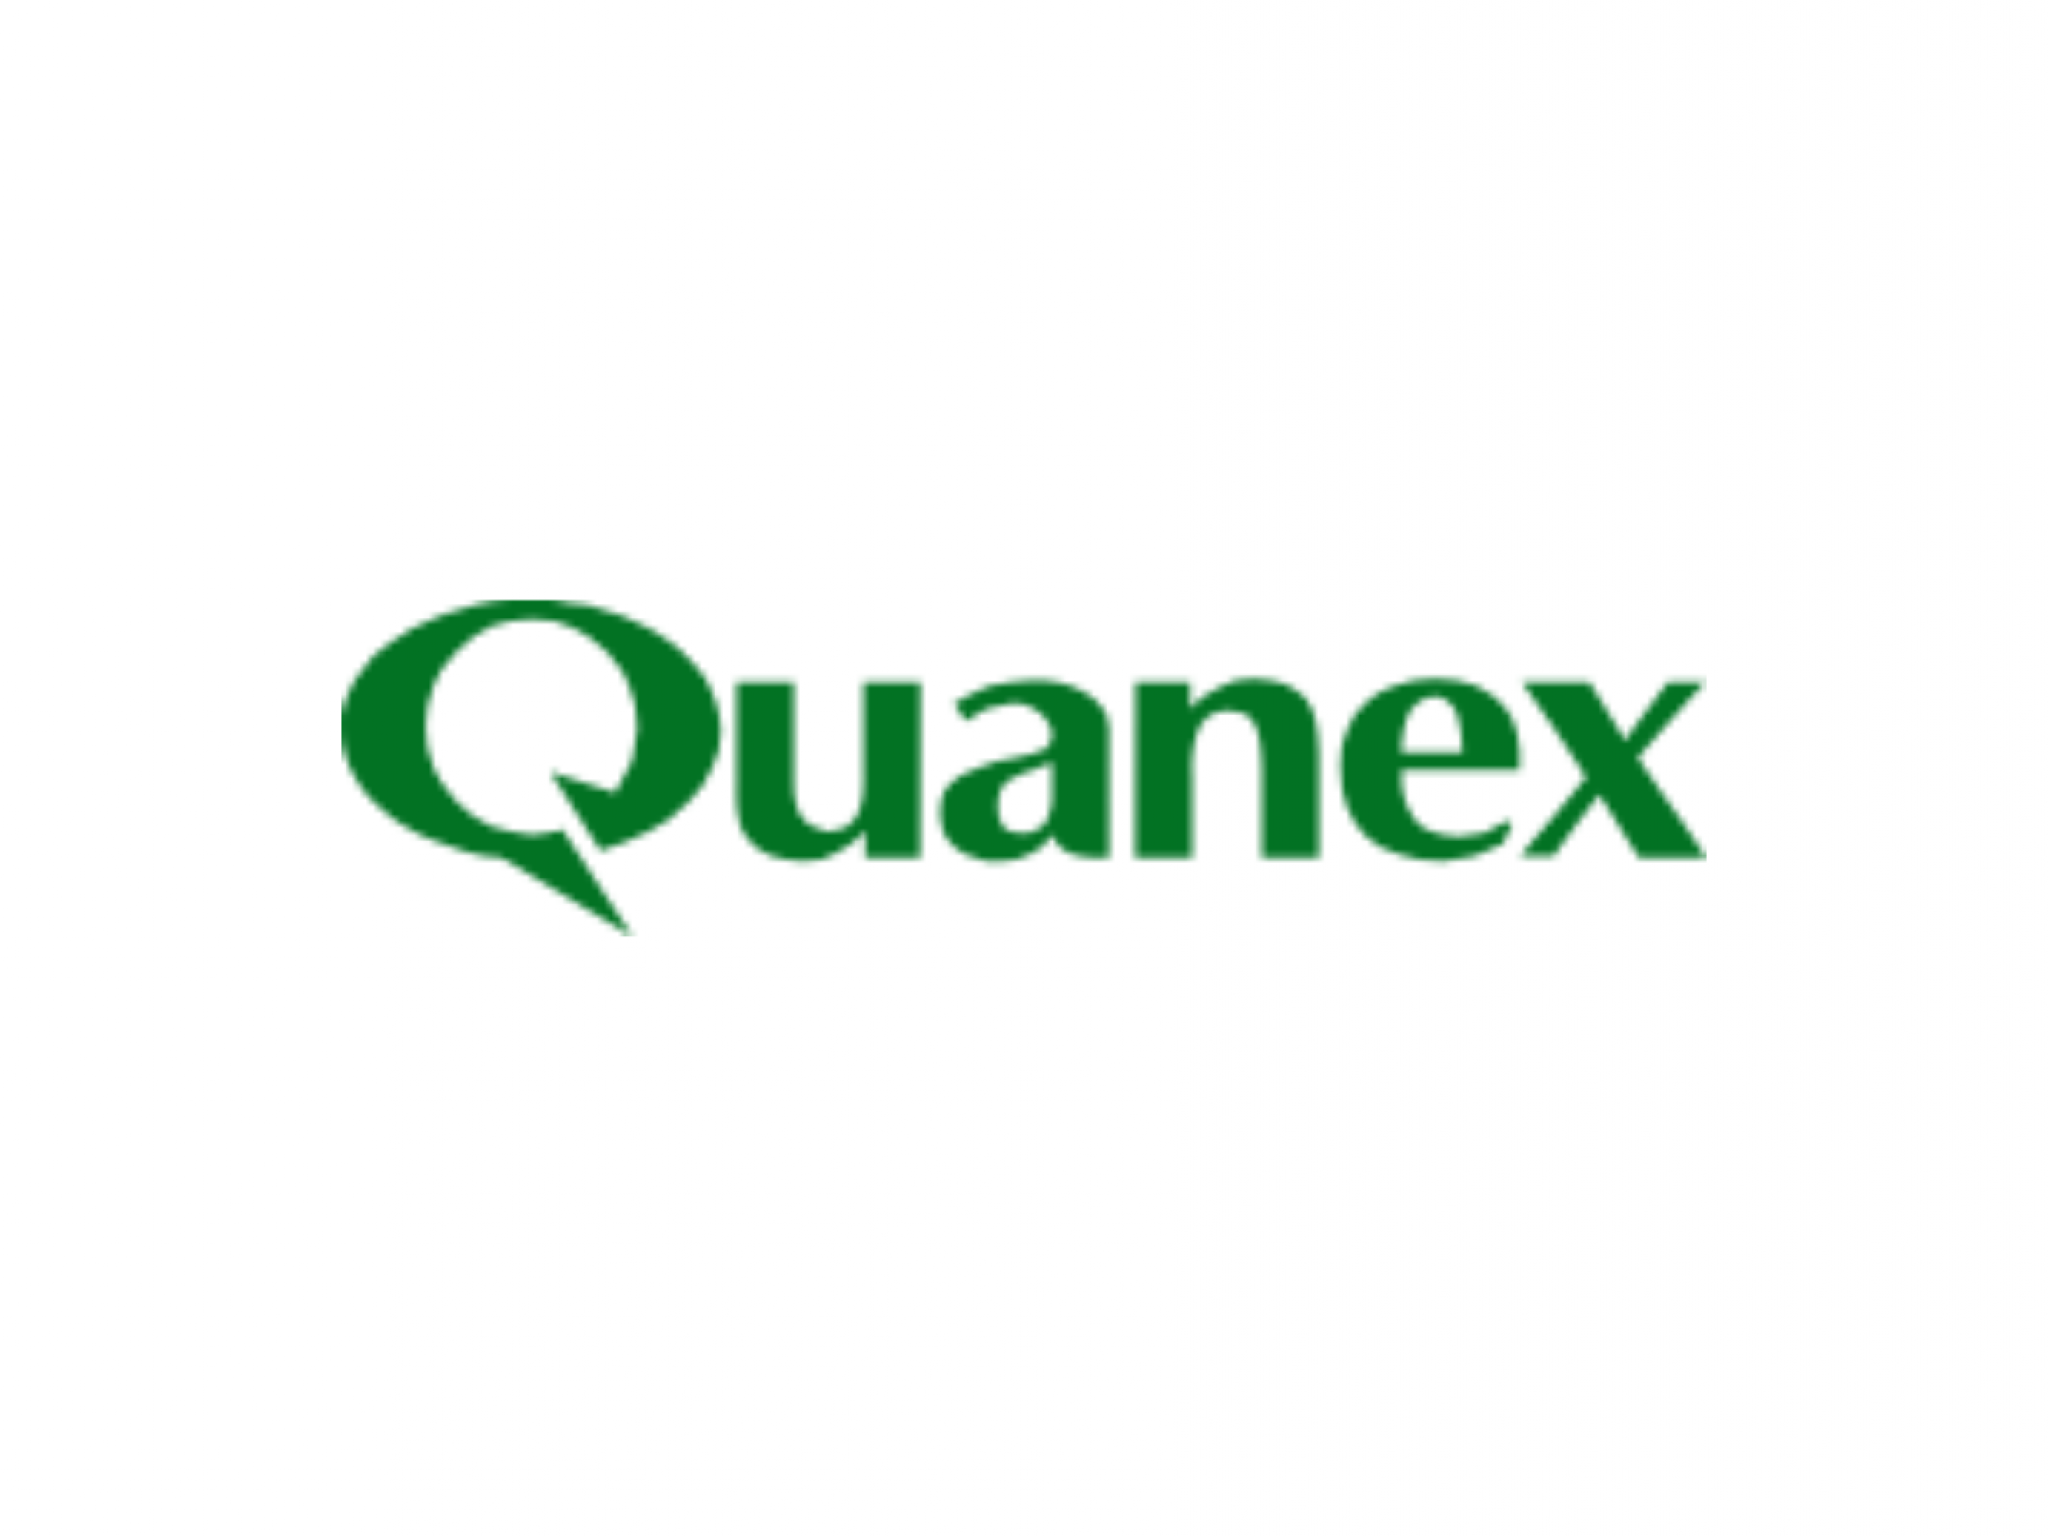  quanexs-strategic-moves-pay-off-analyst-raises-price-target-amid-operational-gains 